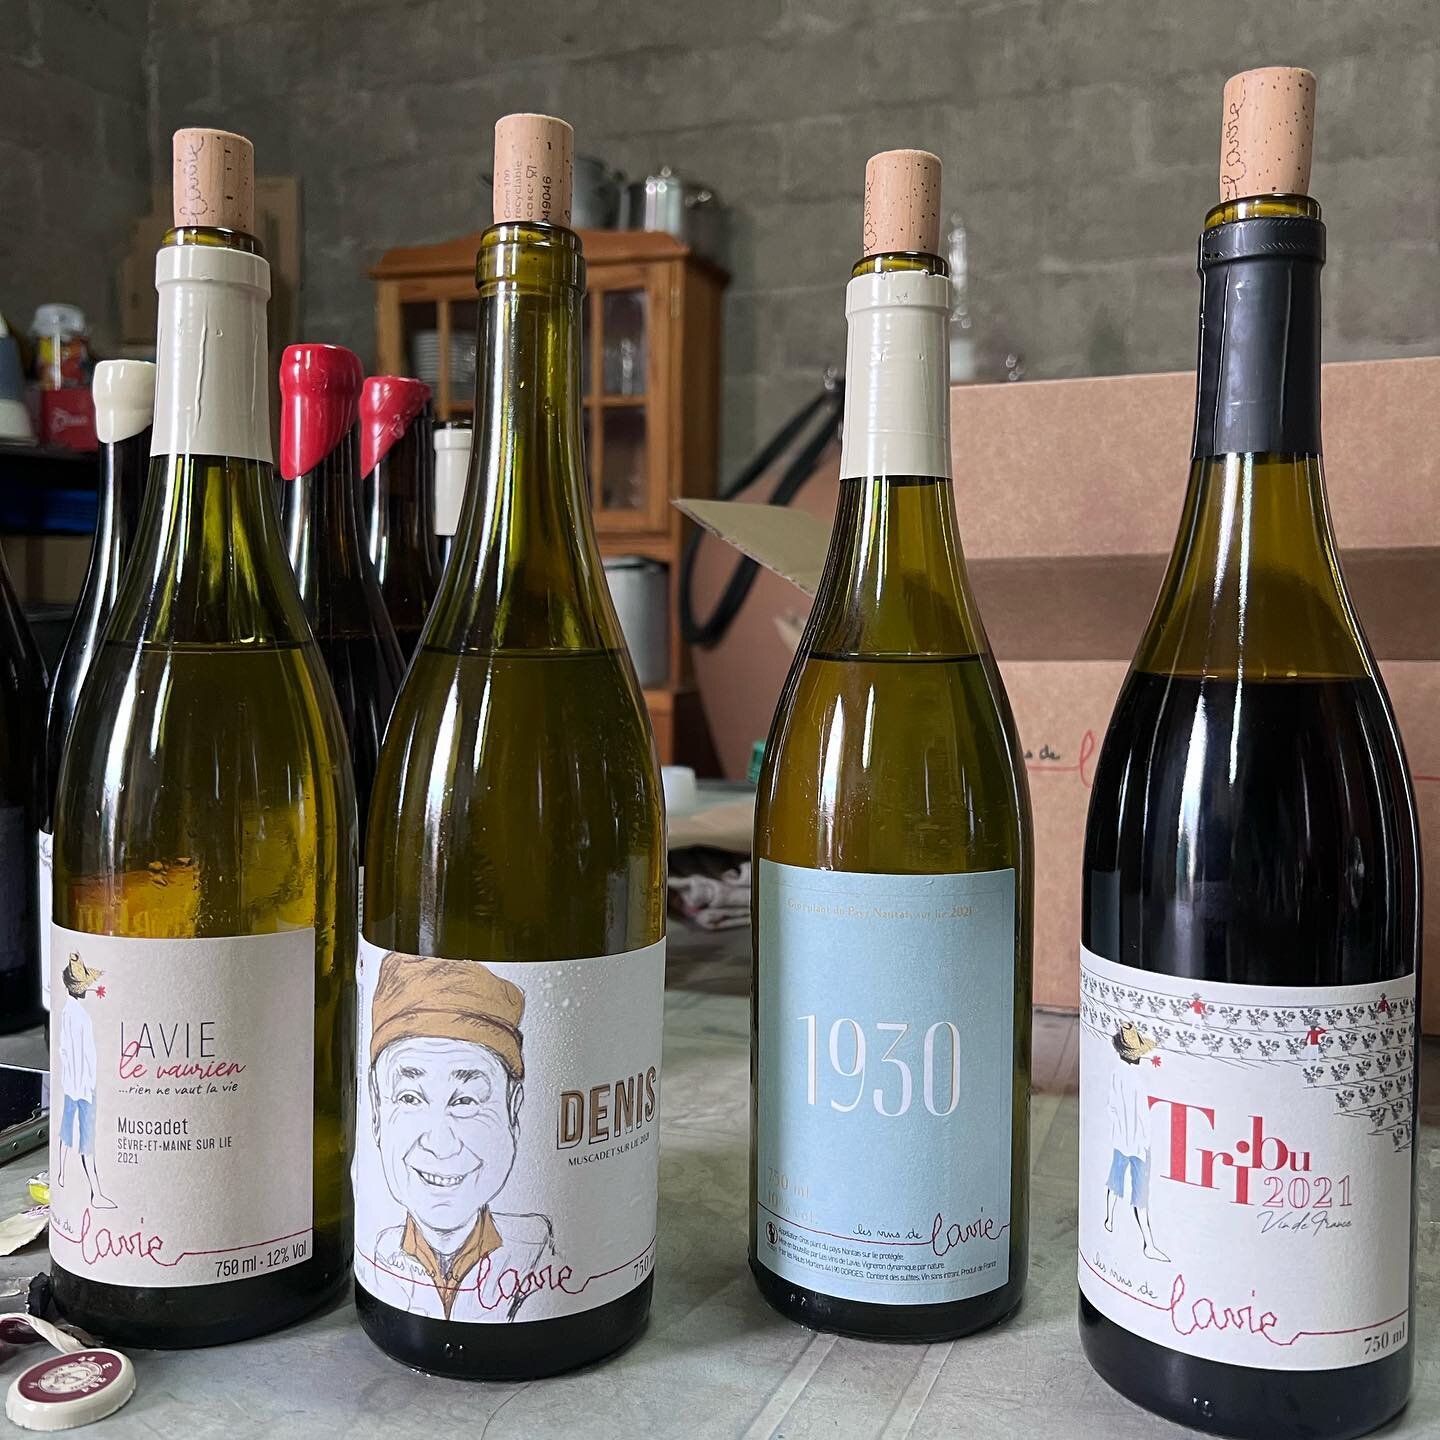 Welcome back Domaine La Vie / @les_vins_de_lavie to the CRS portfolio!  It's been too long!  This time, we have some motha effin Muscadet for your 👄👅!

Guillaume Lavie is originally from Gu&eacute;rande (Brittany), but first discovered natural wine